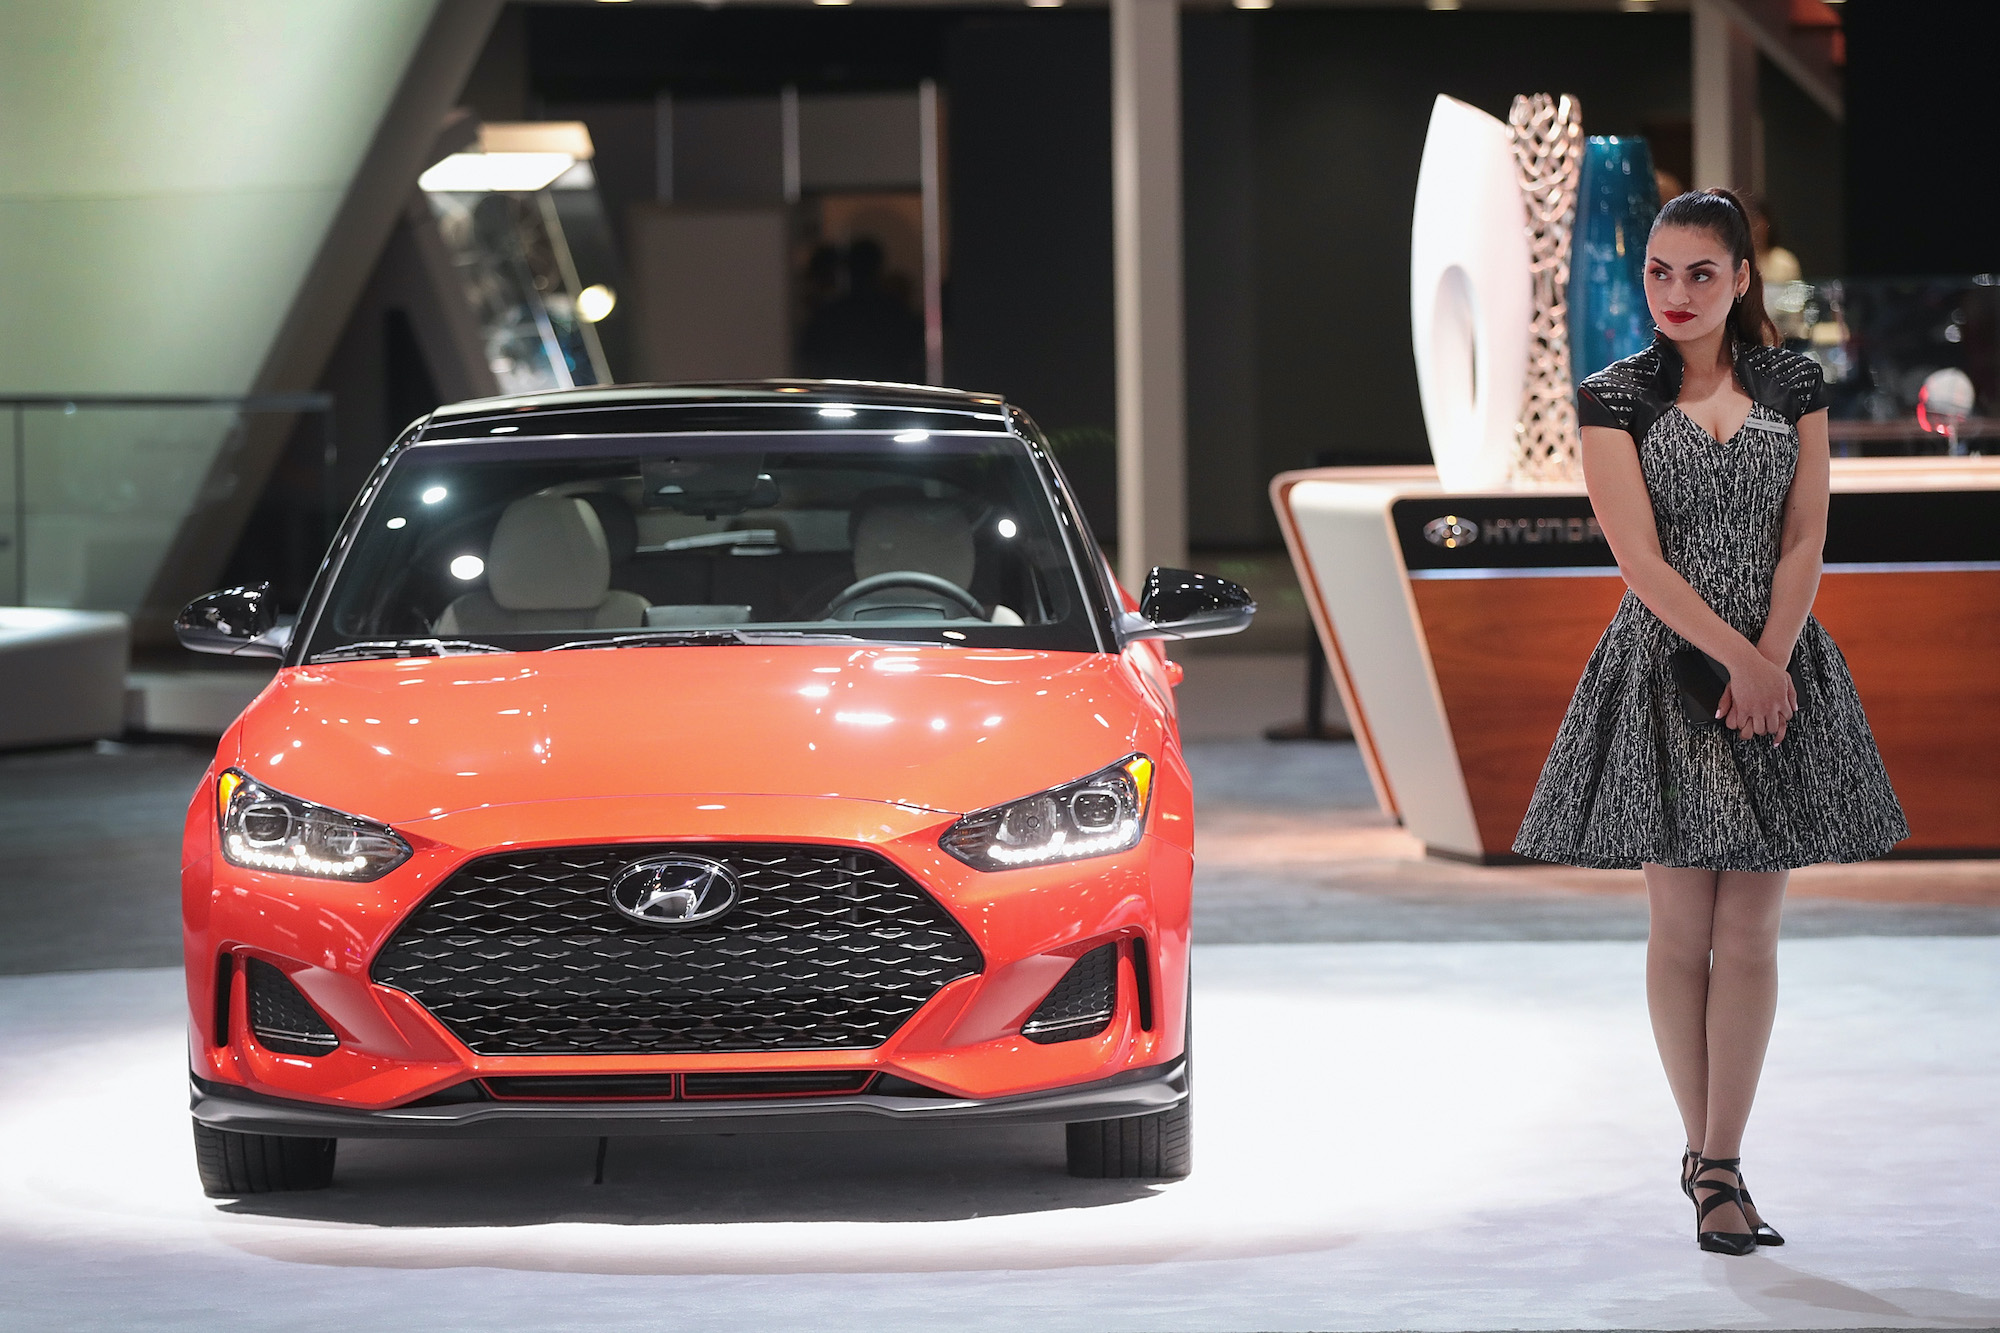 A Hyundai Veloster is displayed at the North American International Auto Show